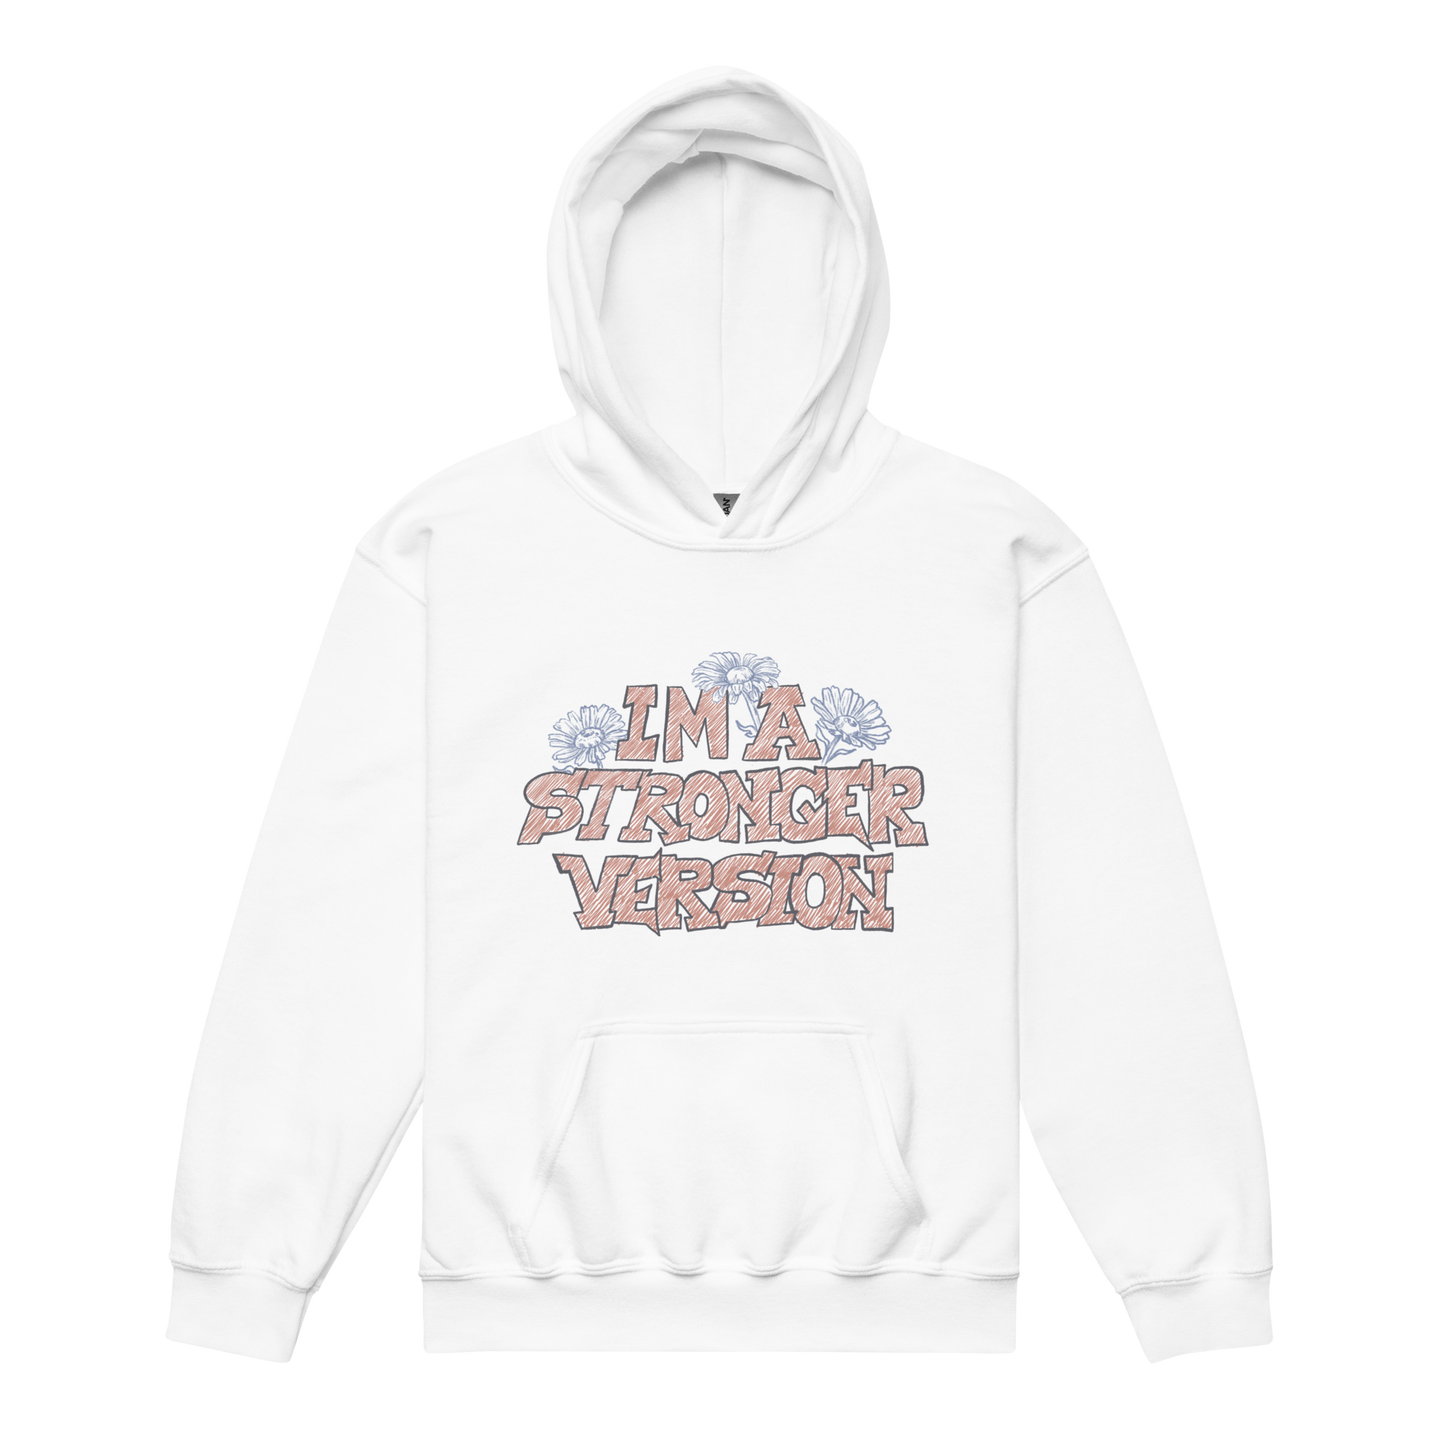 Youth " I am a Stronger Version" Hoodie